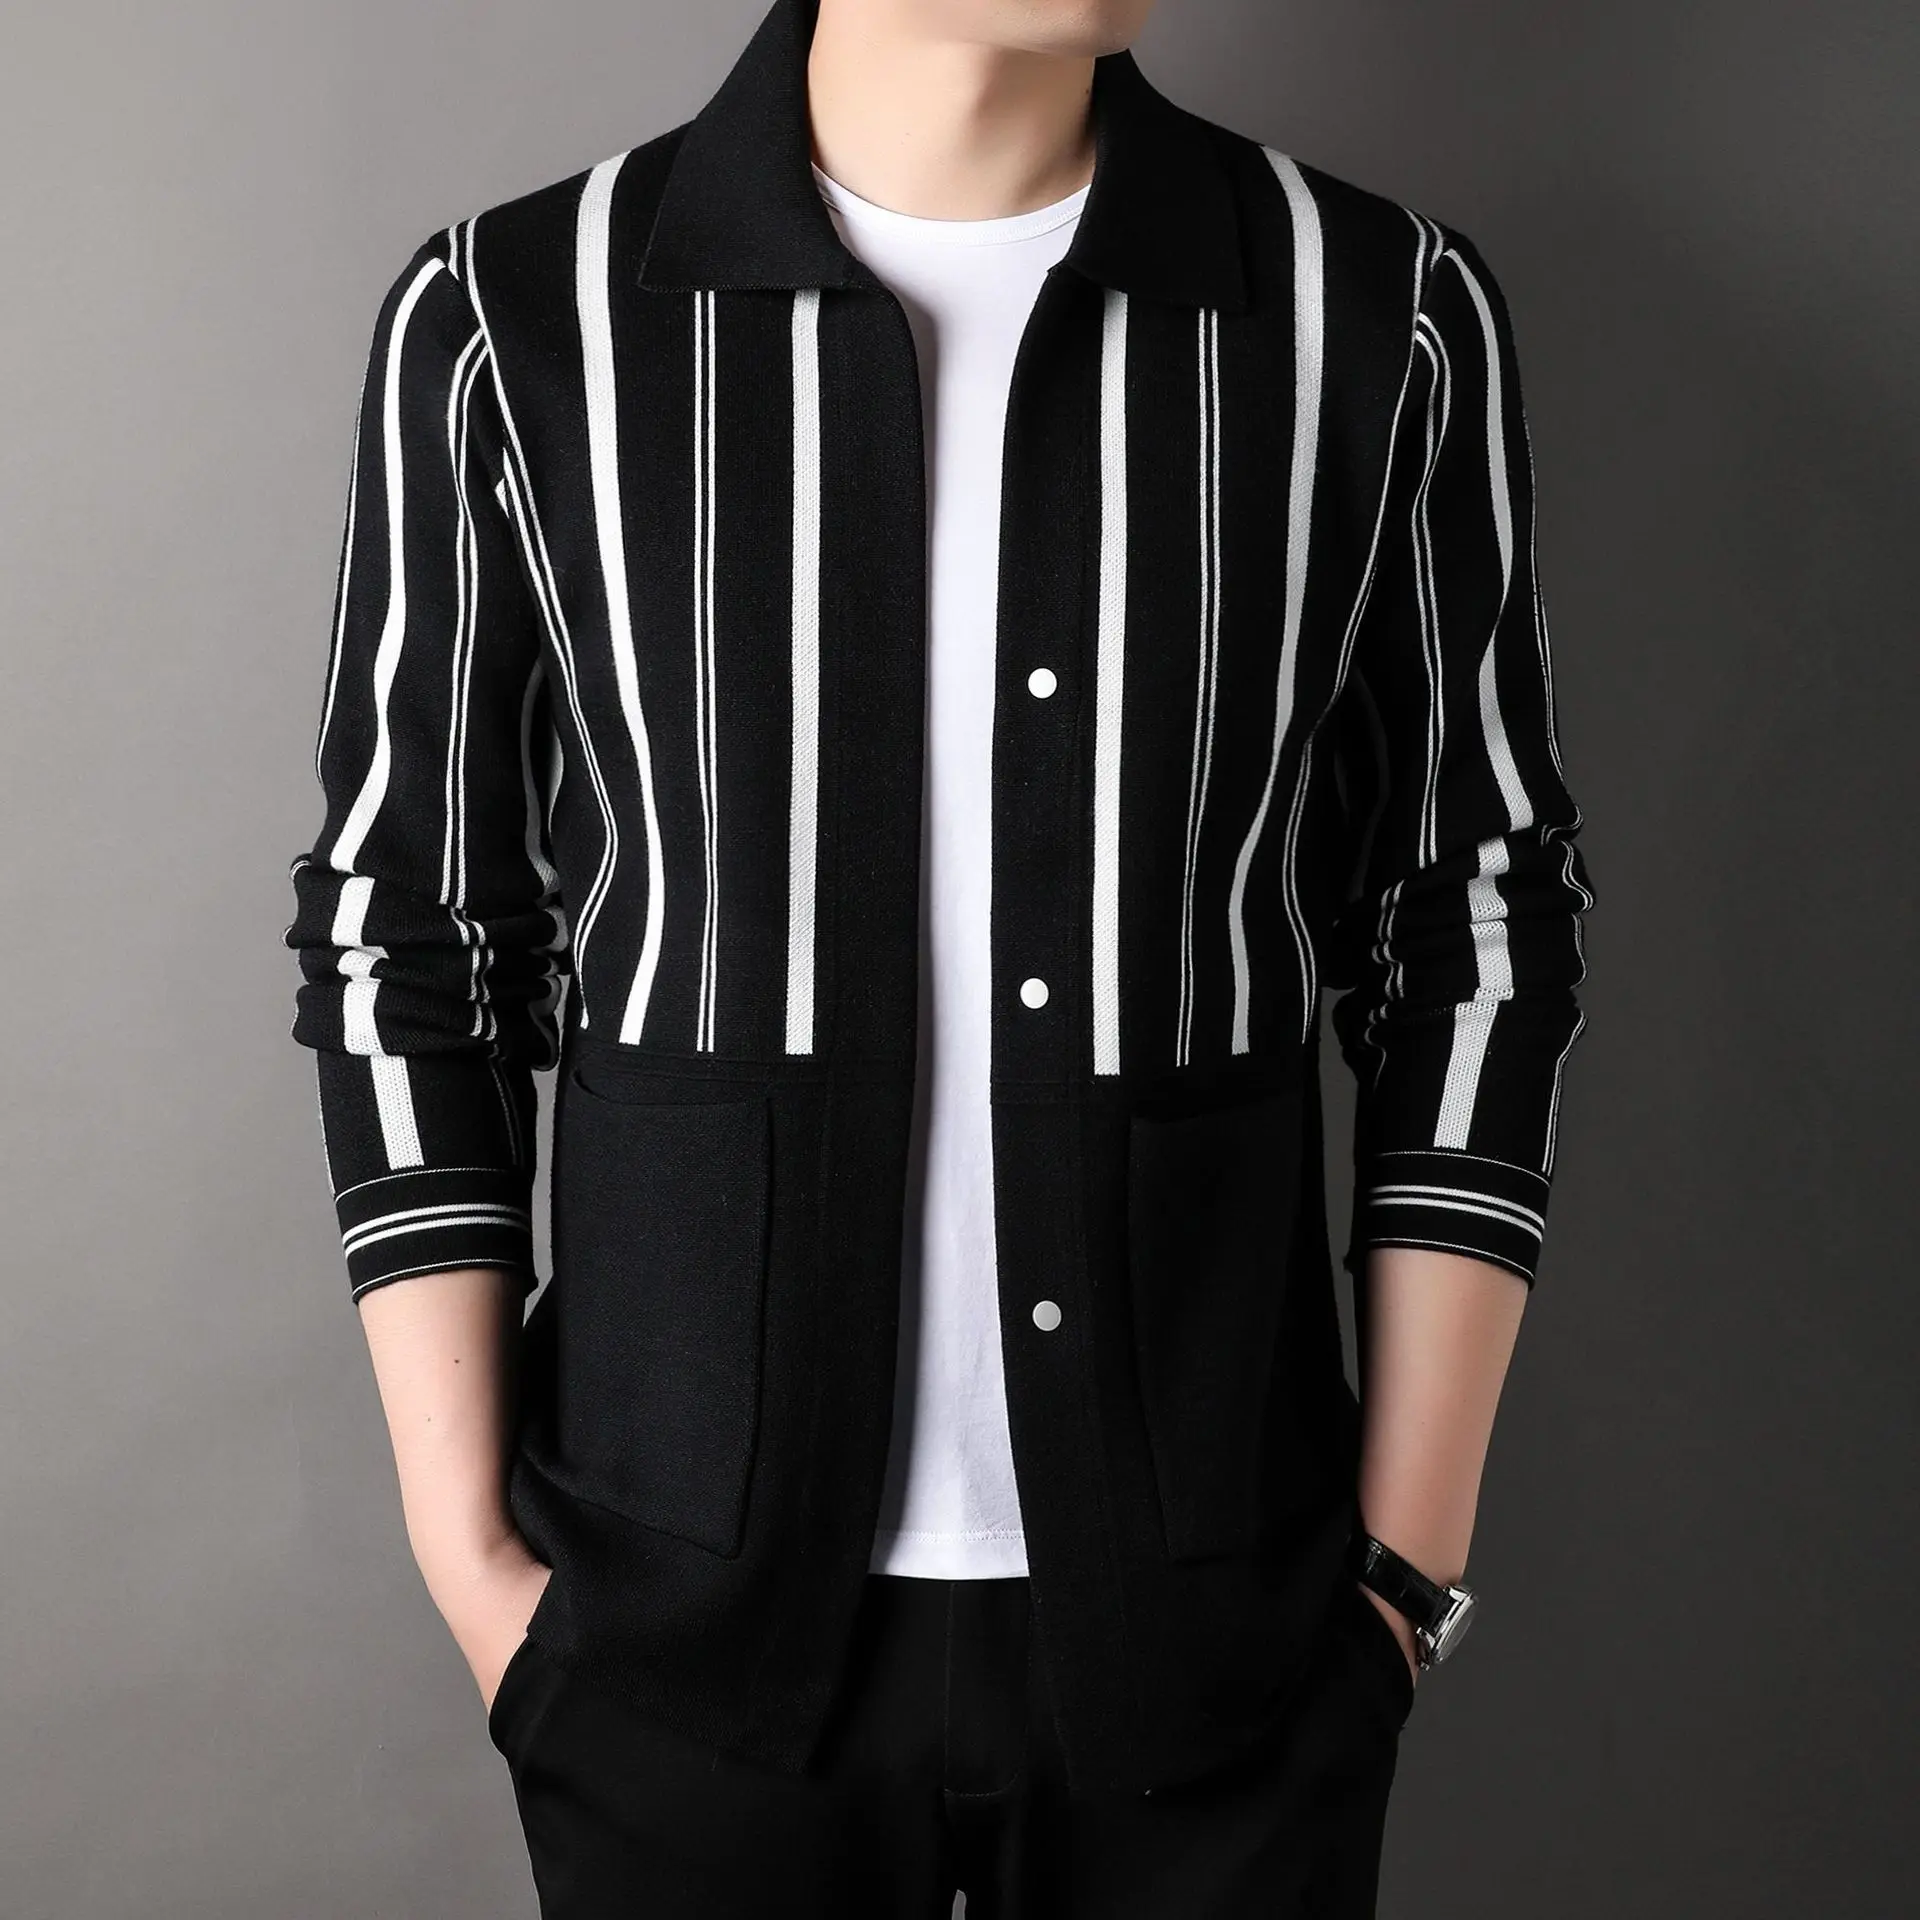 Men's Striped Cardigan Autumn and Winter New Korean Style Lapel Knitwear Long Sleeve Color Matching Daddy Outfit Coat Wholesale tie dye painted jeans women high waist wide leg denim pants hippie loose straight daddy long pants trousers 2022 new